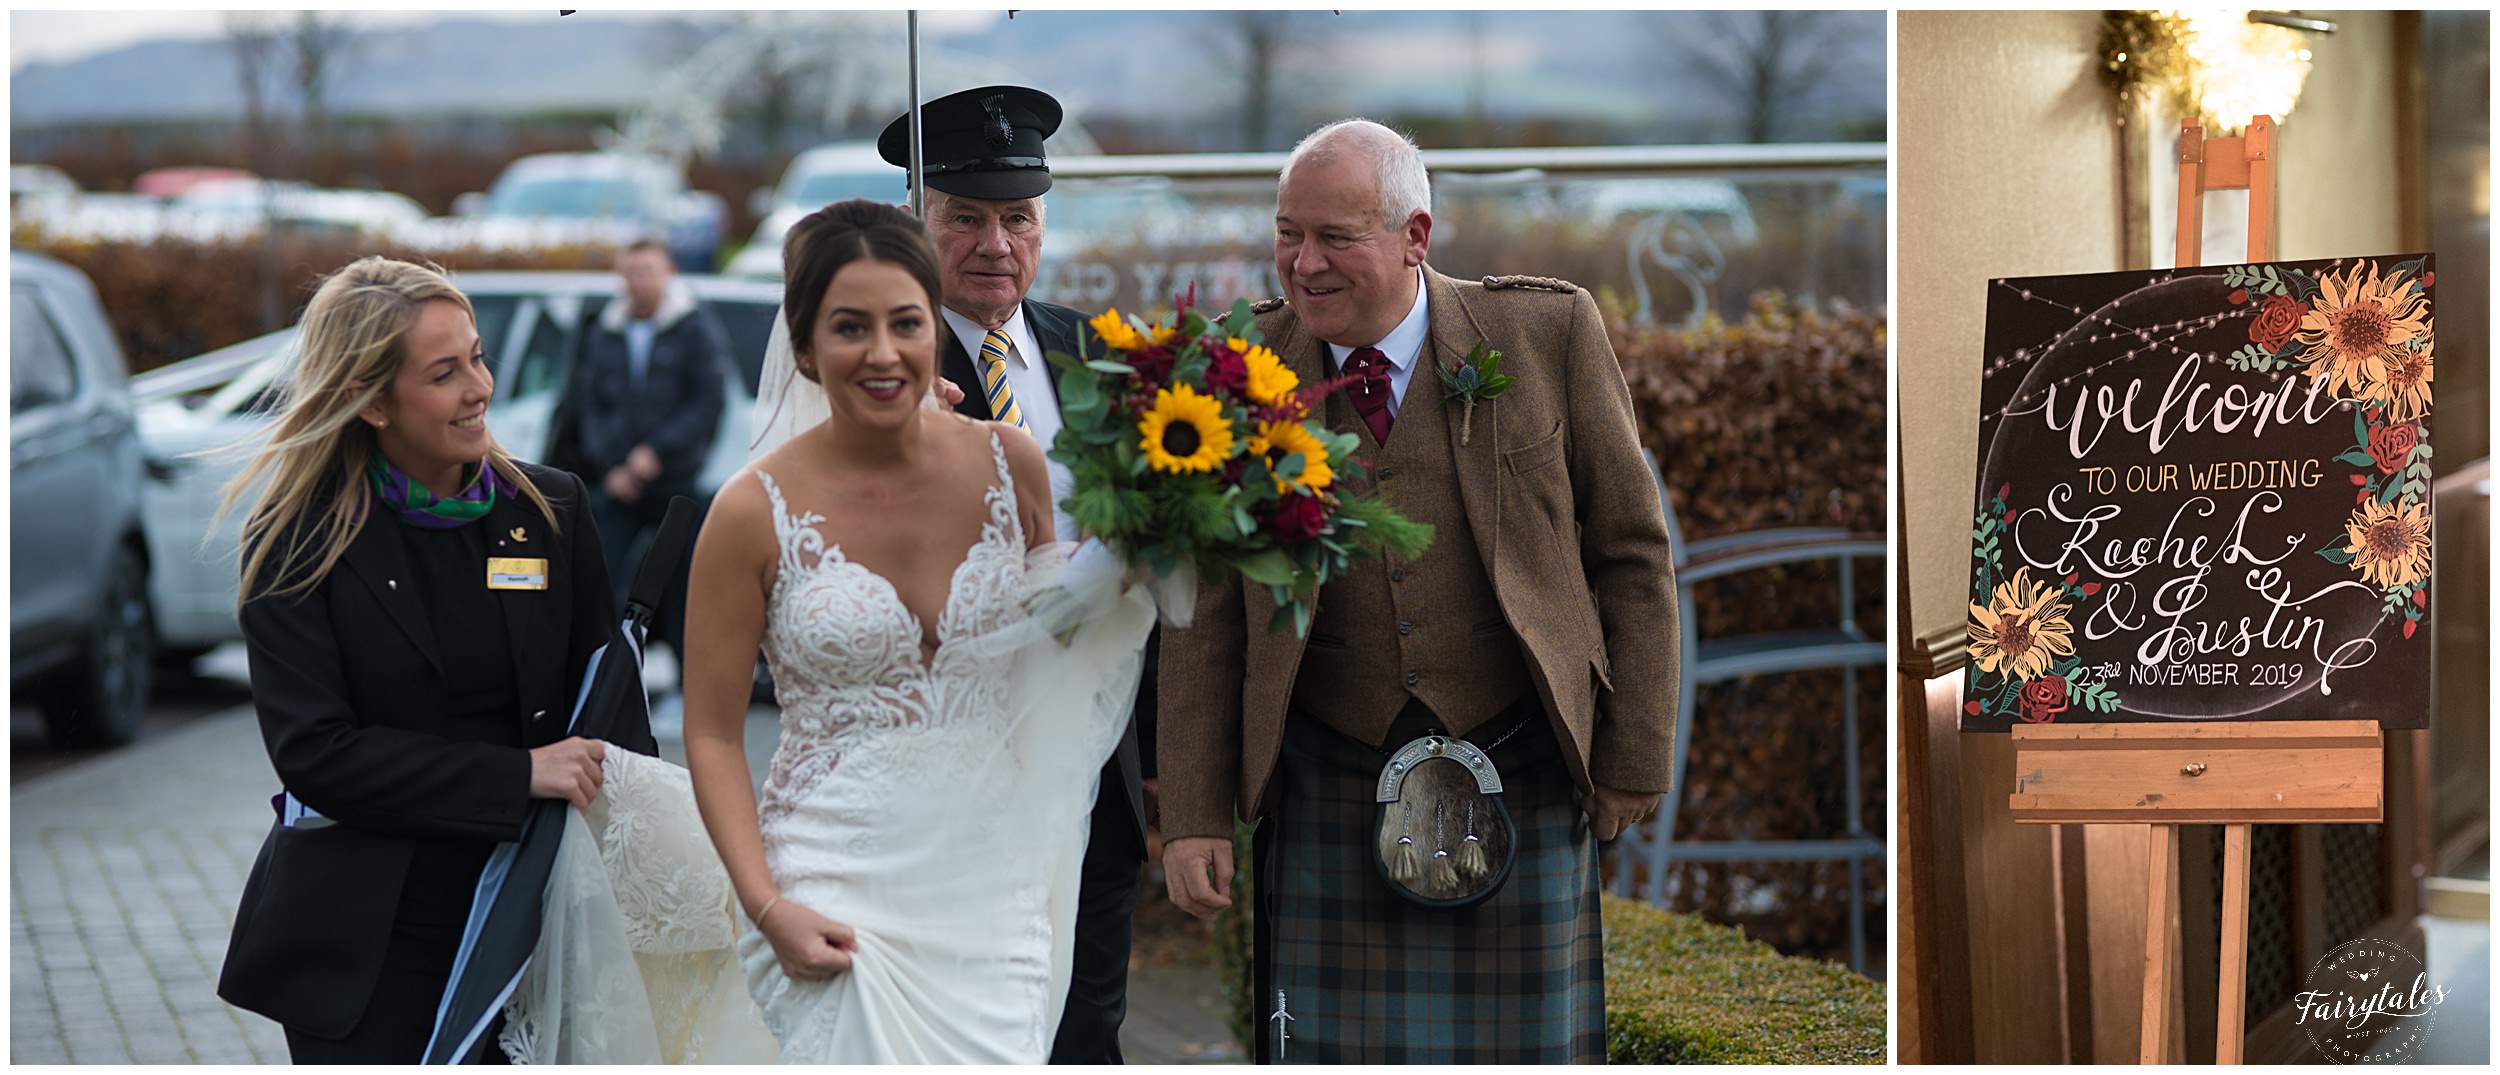 bride arriving at Ingliston with father and wedding coordinator